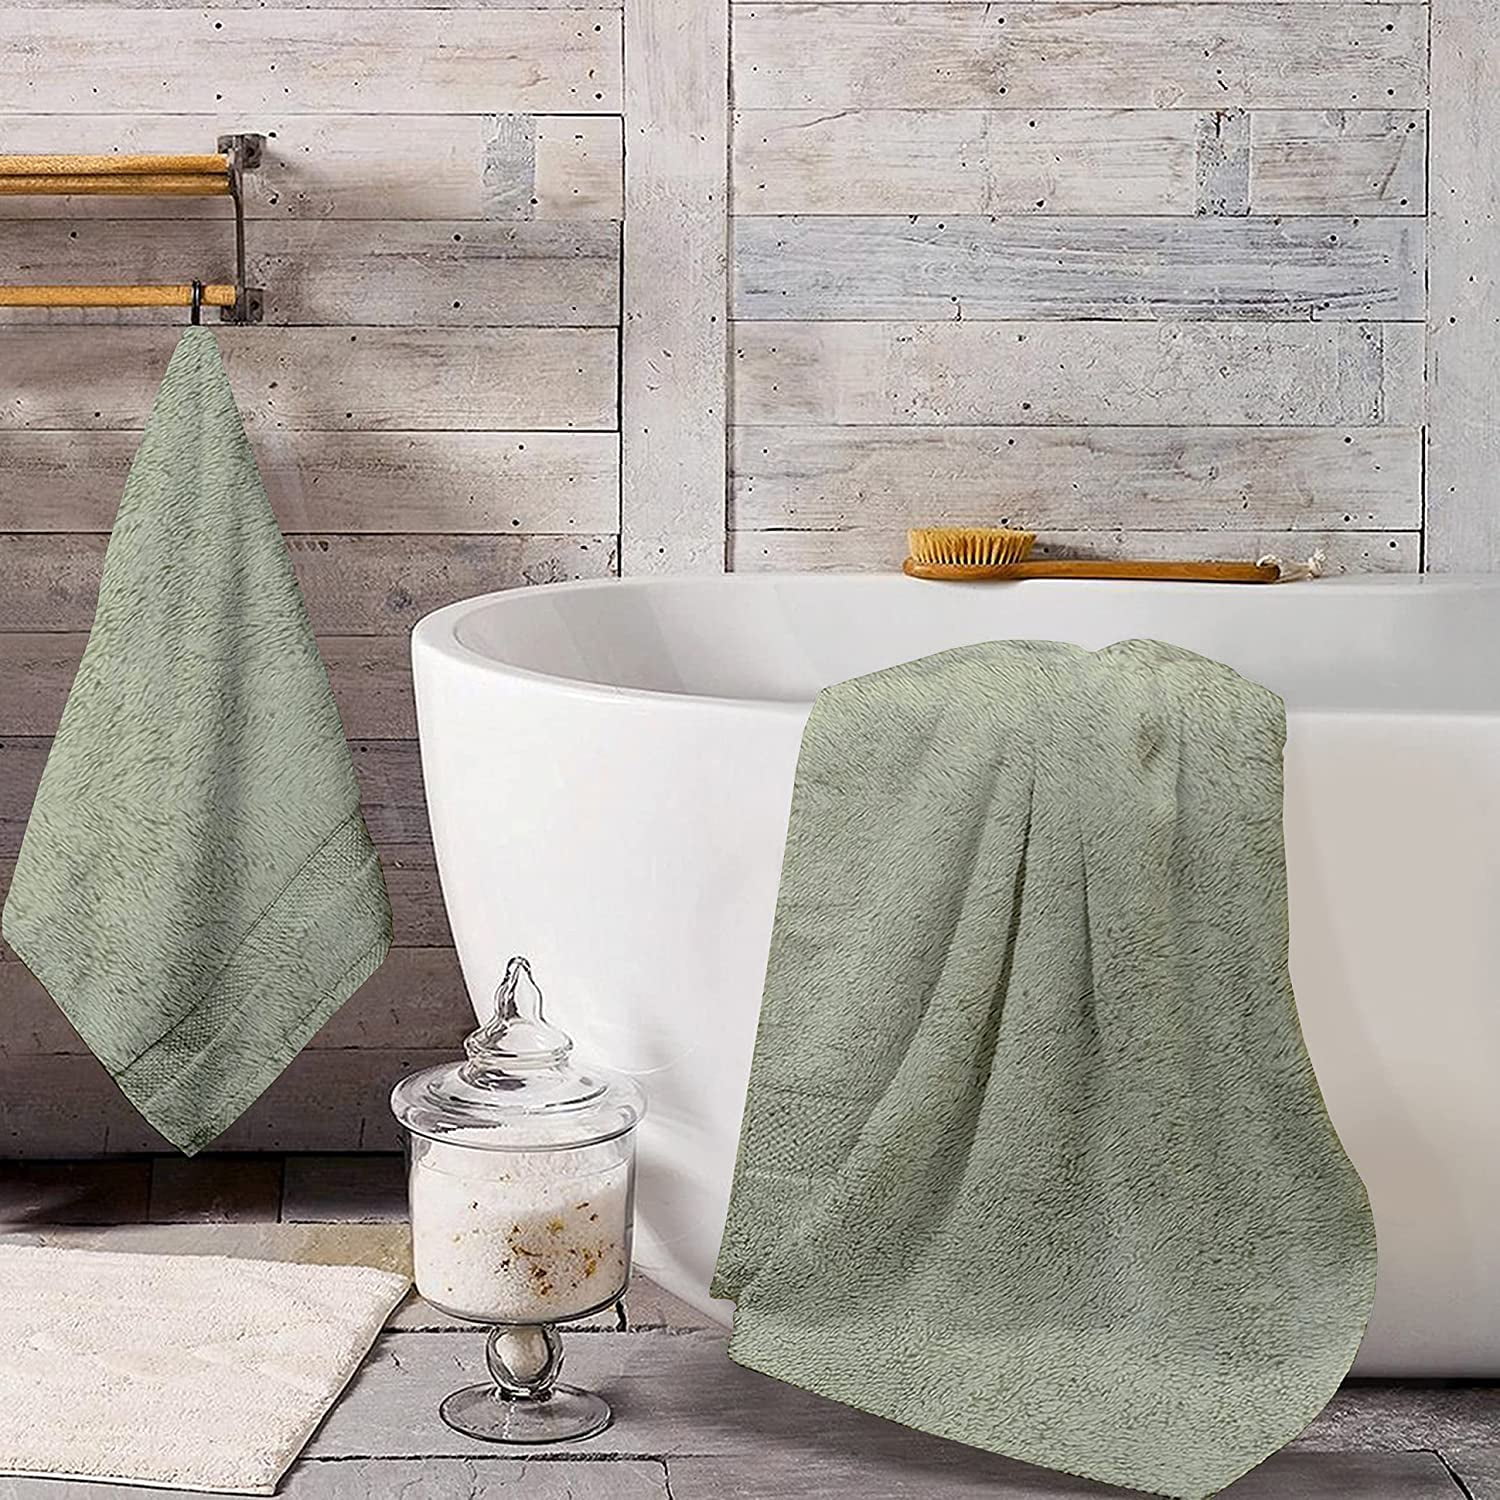  Texere 100% Organic Cotton Jacquard 650 GSM Premium Bath Towel  Sets - Extra Absorbent Quick Dry and Plush, 2 Large Bath Towels, 2 Hand  Towels, 2 Washcloths (Cable, Granite, 6 Piece) : Home & Kitchen